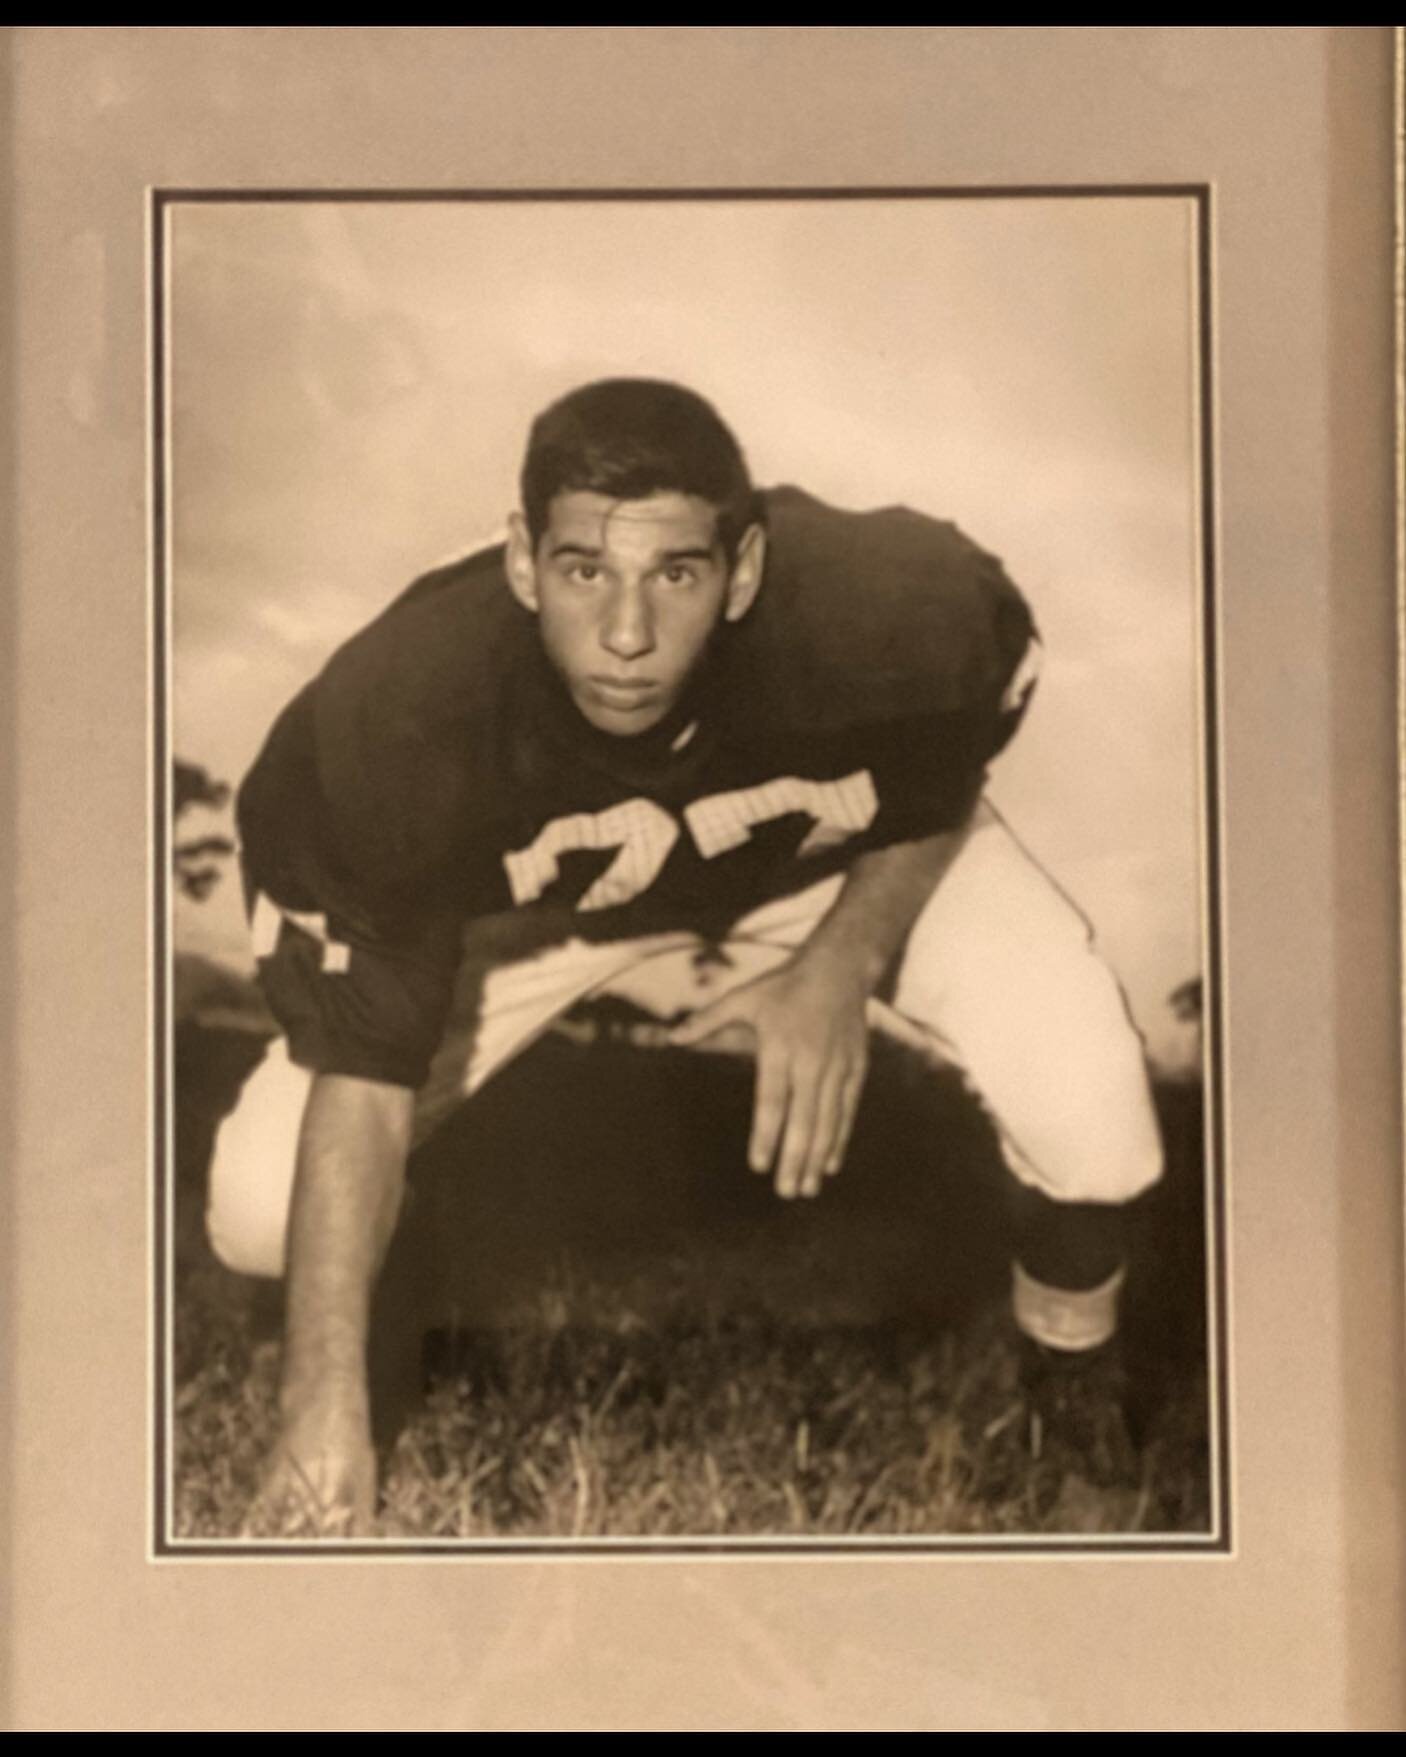 Happy Birthday Daddy!  Chooch, you would have been 79 today 🎂7&rsquo;s always 🏈🌴🐬 🍸 🍝 #tommylouis #chooch #miamibeach #football #goodfella #athlete #miamiwiseguys #papa #luckyseven #happybirthday